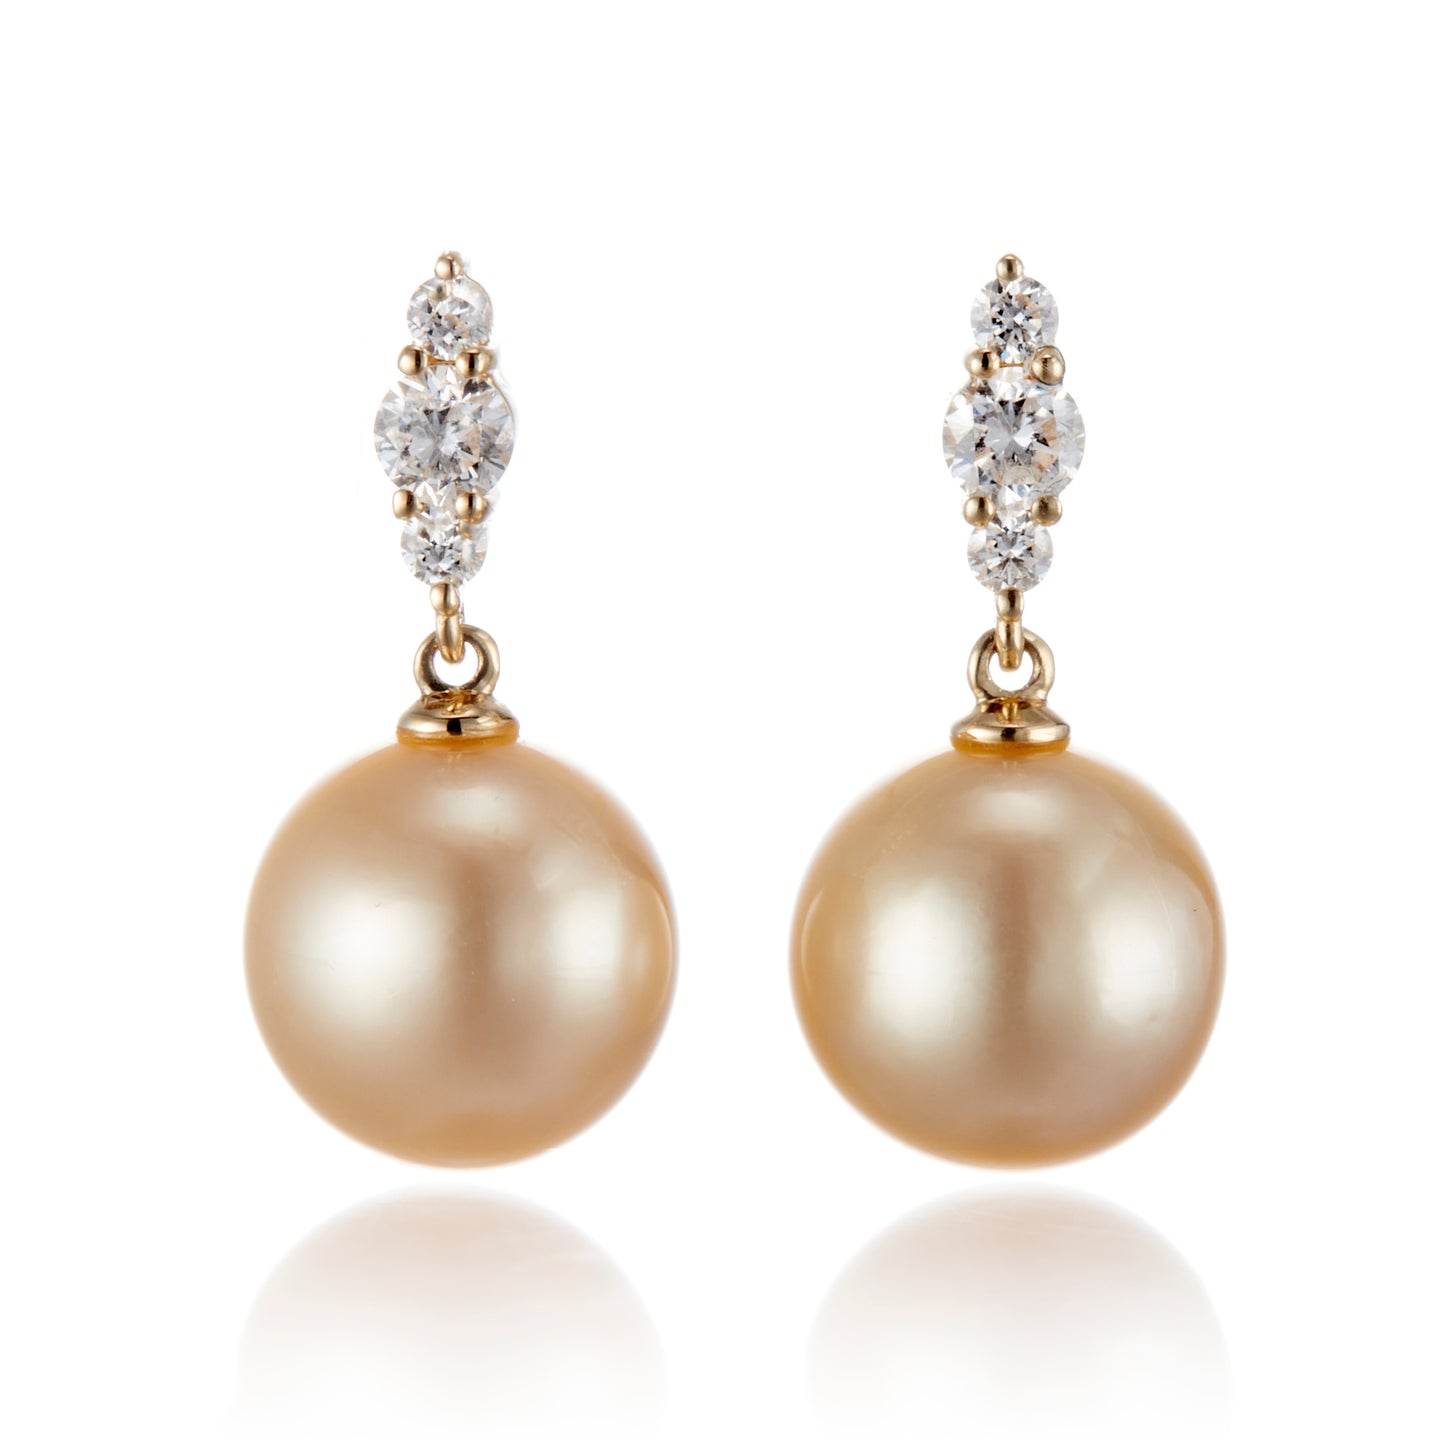 Gump's Signature Orion Earrings in Golden South Sea Pearls & Diamonds